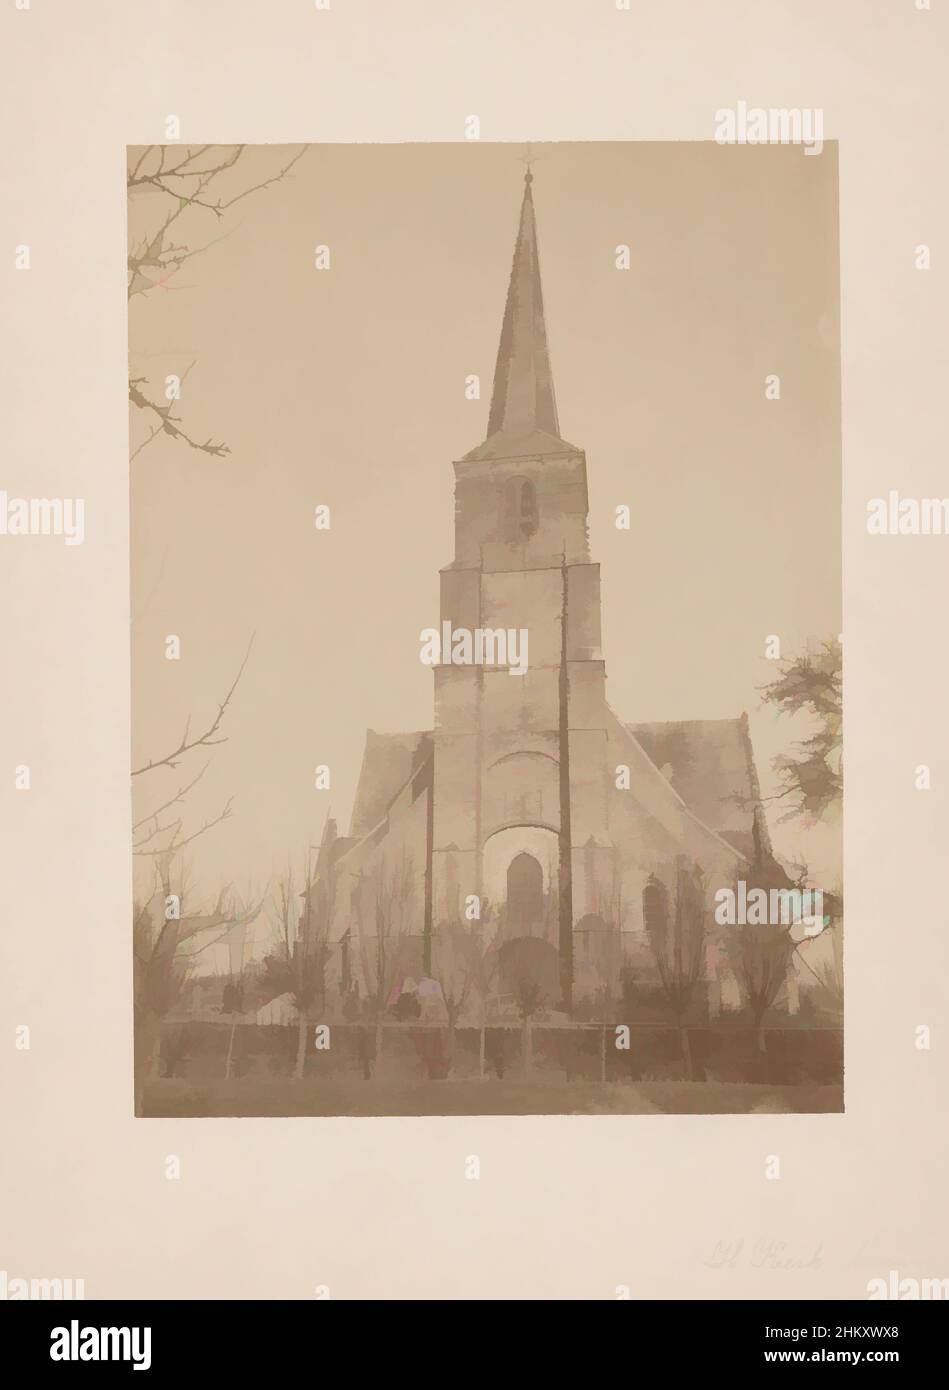 Art inspired by View of the Dorpskerk in Poortugaal, anoniem (Monumentenzorg) (attributed to), Poortugaal, 1902, photographic support, cardboard, albumen print, height 230 mm × width 168 mm, Classic works modernized by Artotop with a splash of modernity. Shapes, color and value, eye-catching visual impact on art. Emotions through freedom of artworks in a contemporary way. A timeless message pursuing a wildly creative new direction. Artists turning to the digital medium and creating the Artotop NFT Stock Photo